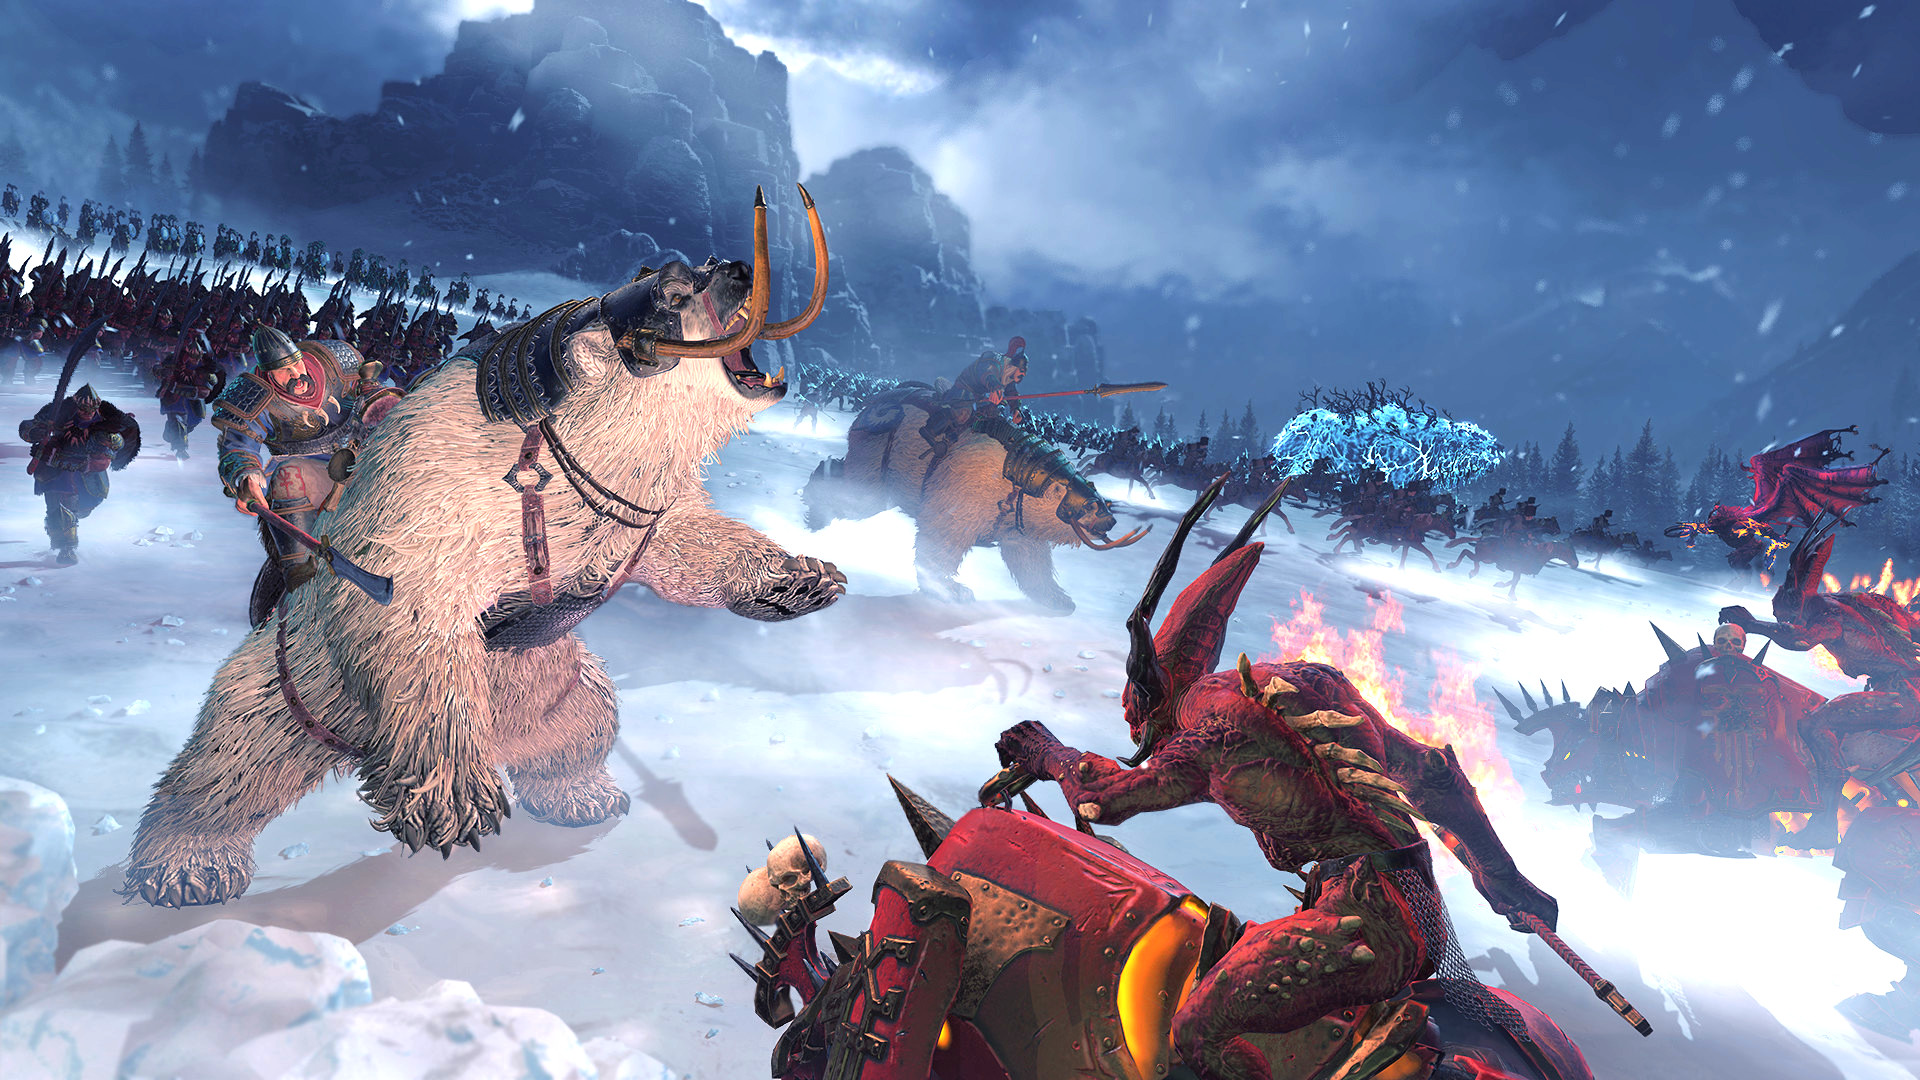 Best strategy games: Total War: Warhammer 3. Image shows a polar bear-like creature in a snowy wilderness.